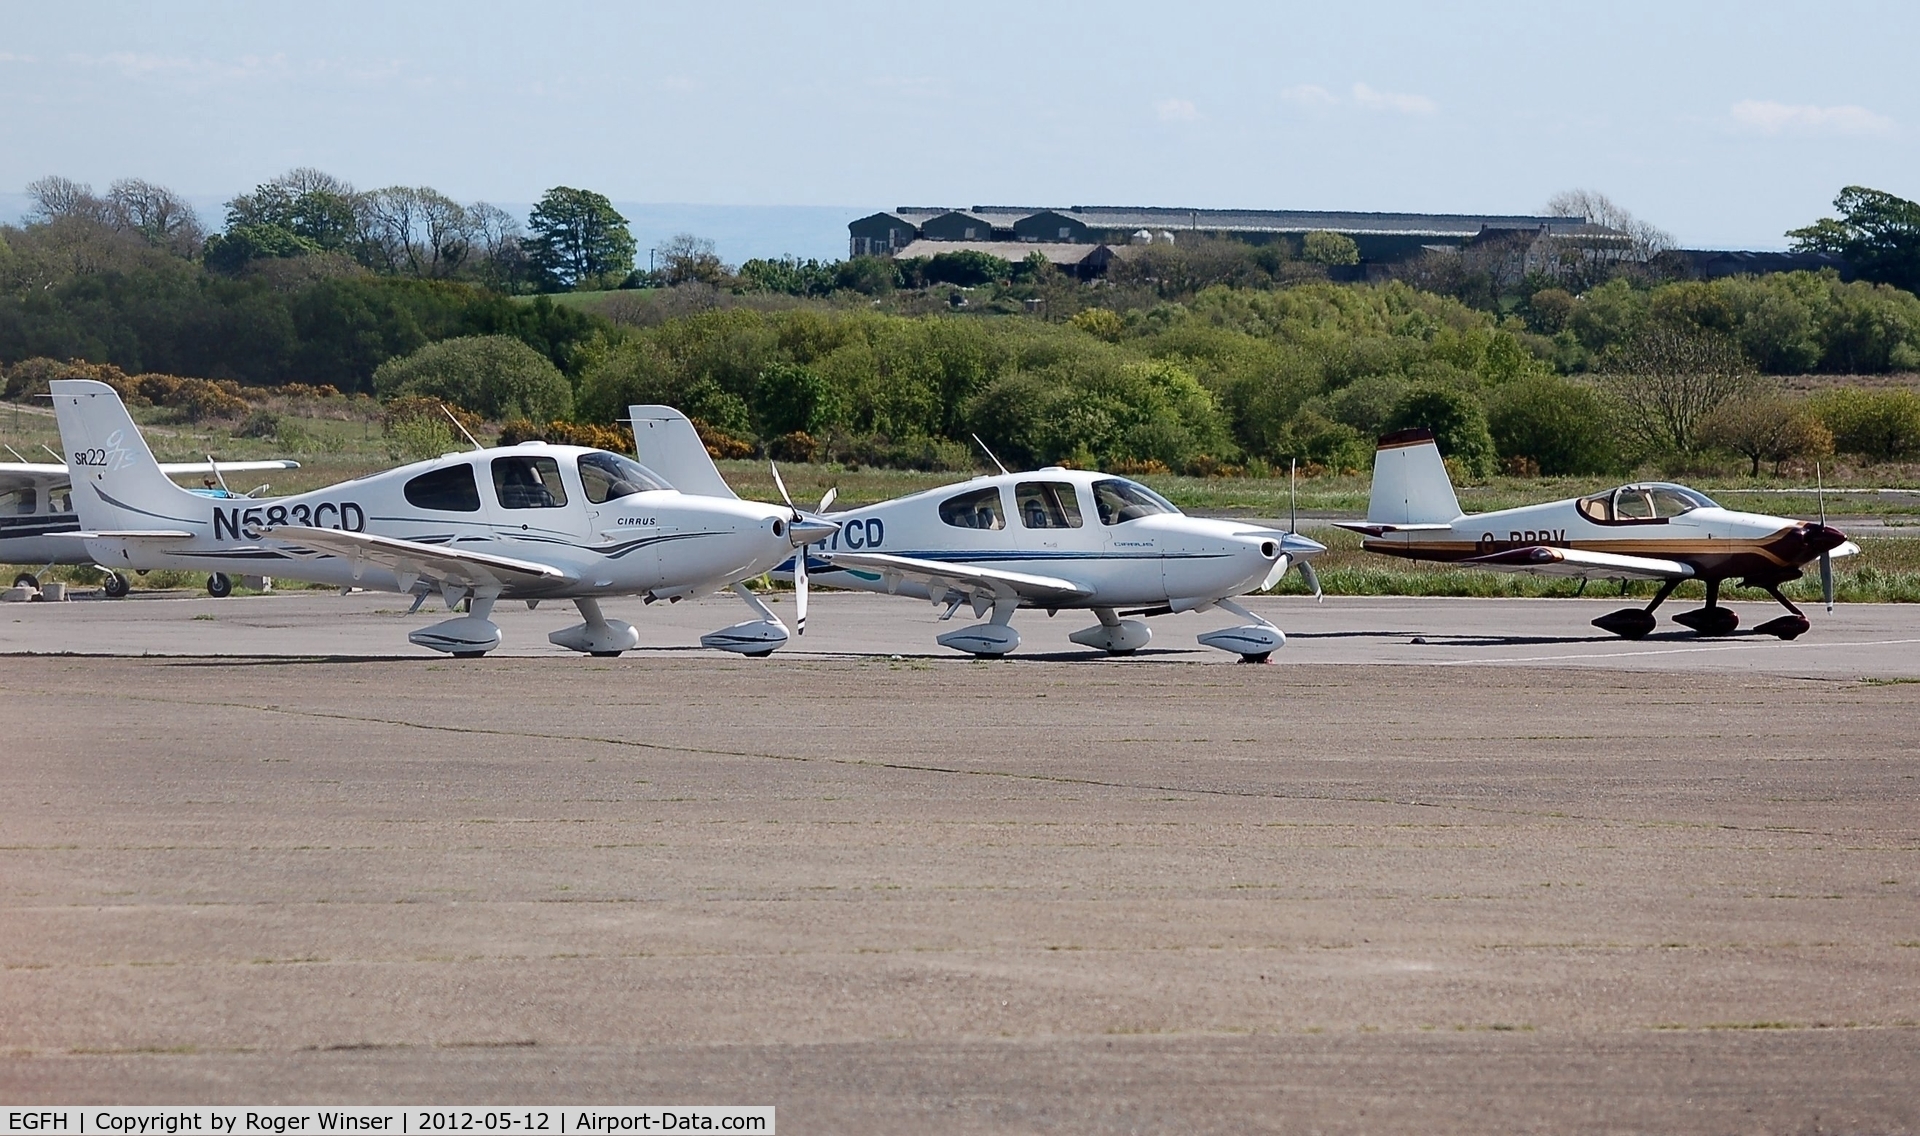 Swansea Airport, Swansea, Wales United Kingdom (EGFH) - Busy day at the airport - visiting aircraft.